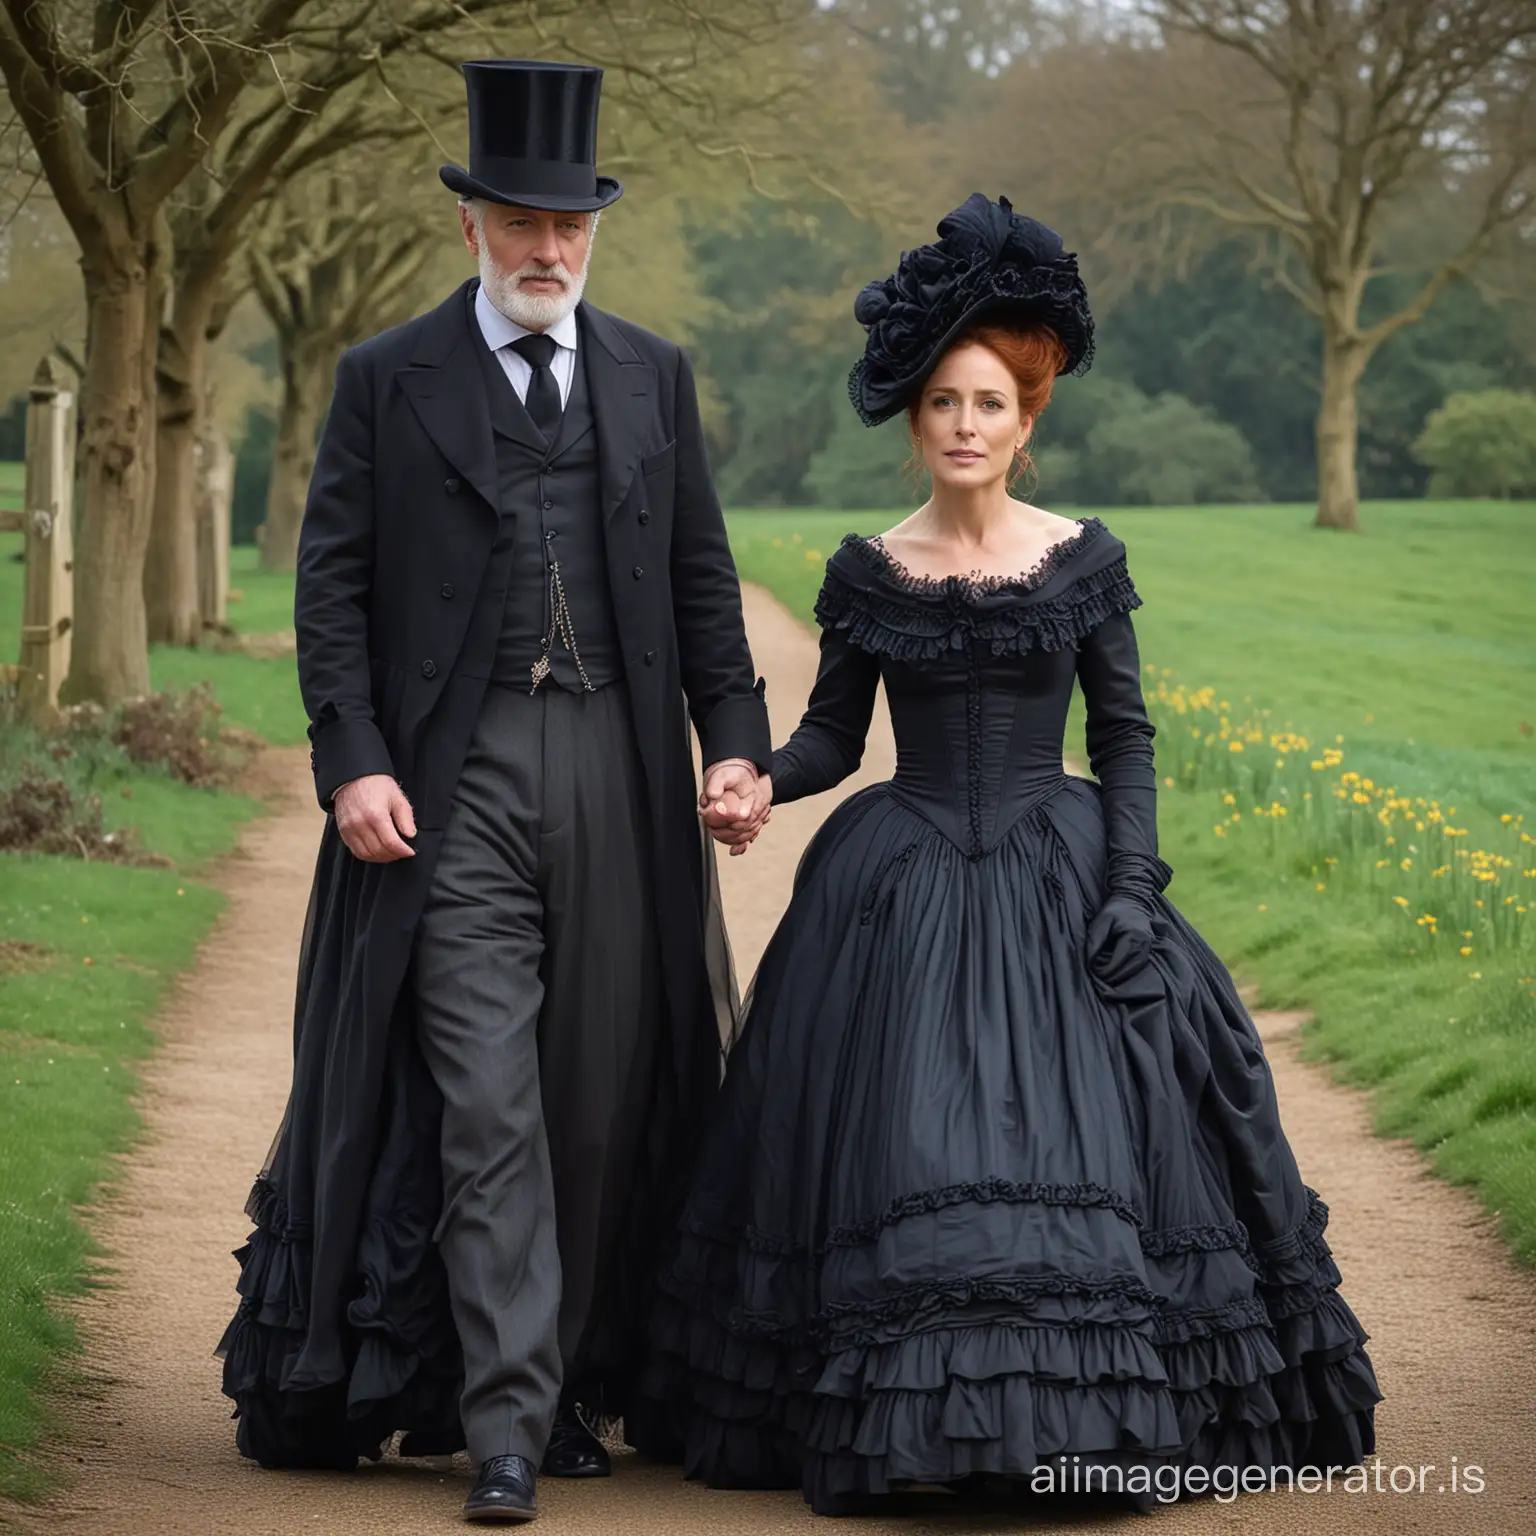 red hair Gillian Anderson wearing a dark navy floor-length loose billowing 1860 Victorian crinoline poofy dress with a frilly bonnet walking with an old man dressed in a black Victorian suit who seems to be her newlywed husband